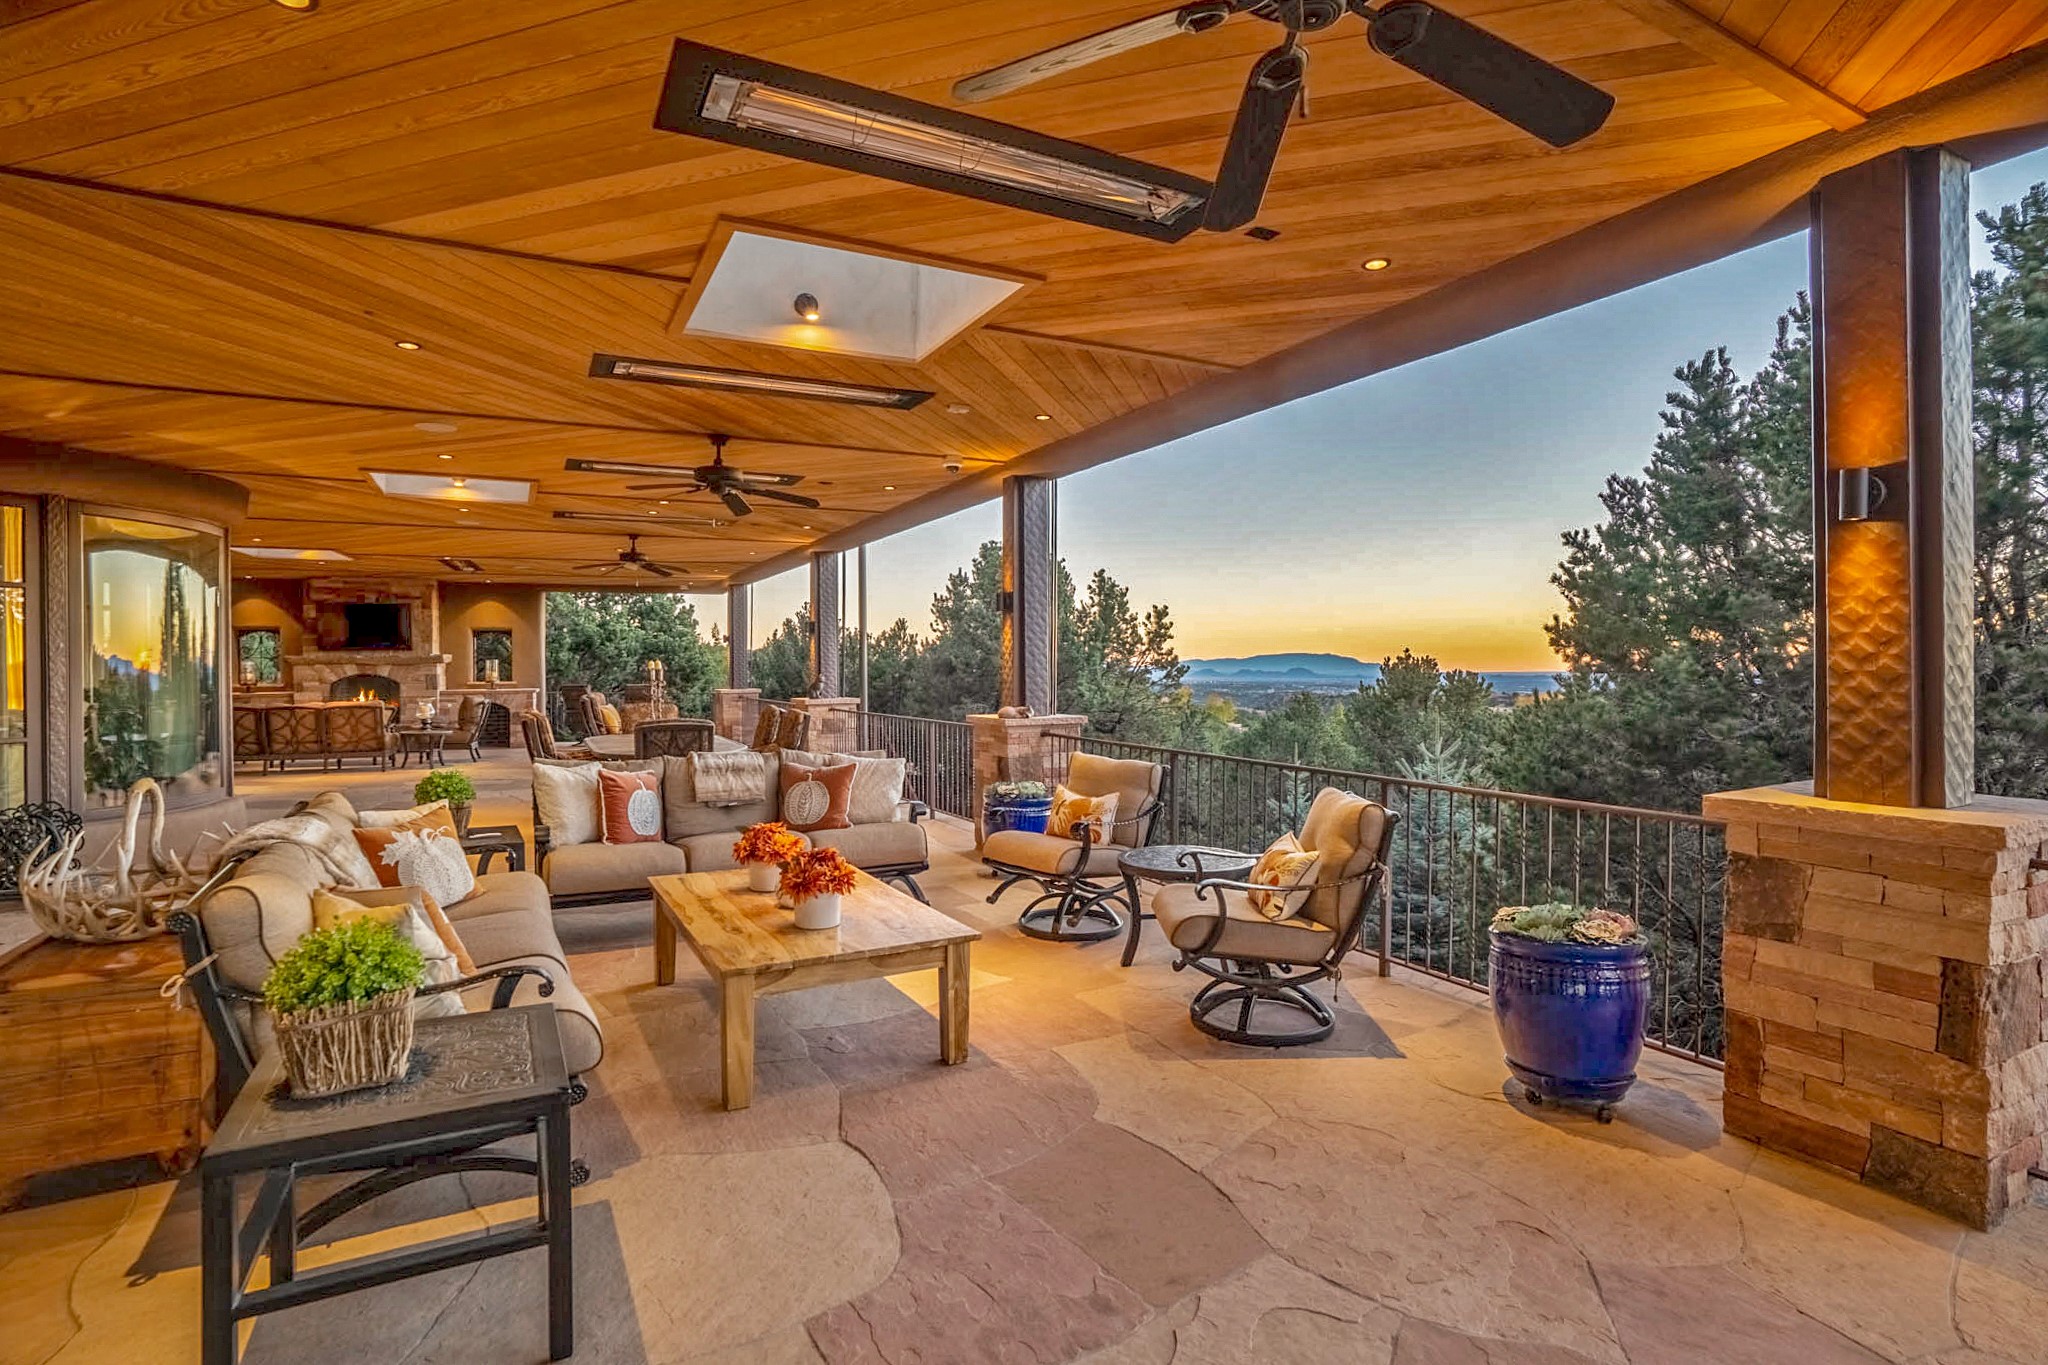 A 2400 sq. ft. sunset-facing portal with outdoor heaters make for year-round use